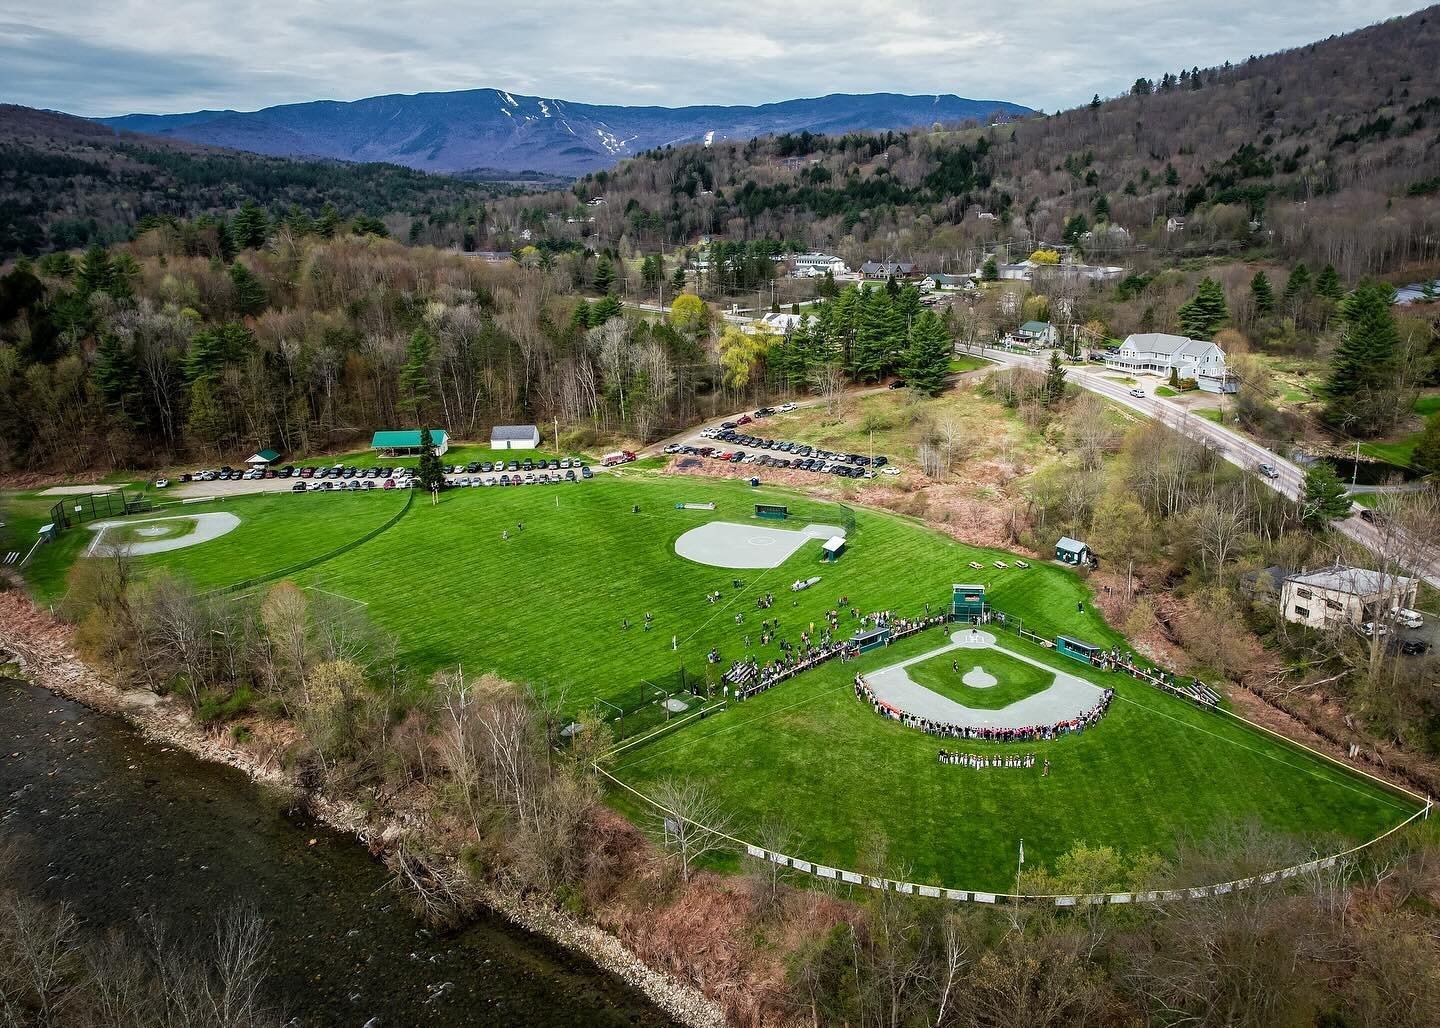 Opening Day for the Mad River Valley Little League. One of the very best days of the year! ⚾️❤️ 

#madrivervalley #photosbykintz #littleleague #openingday